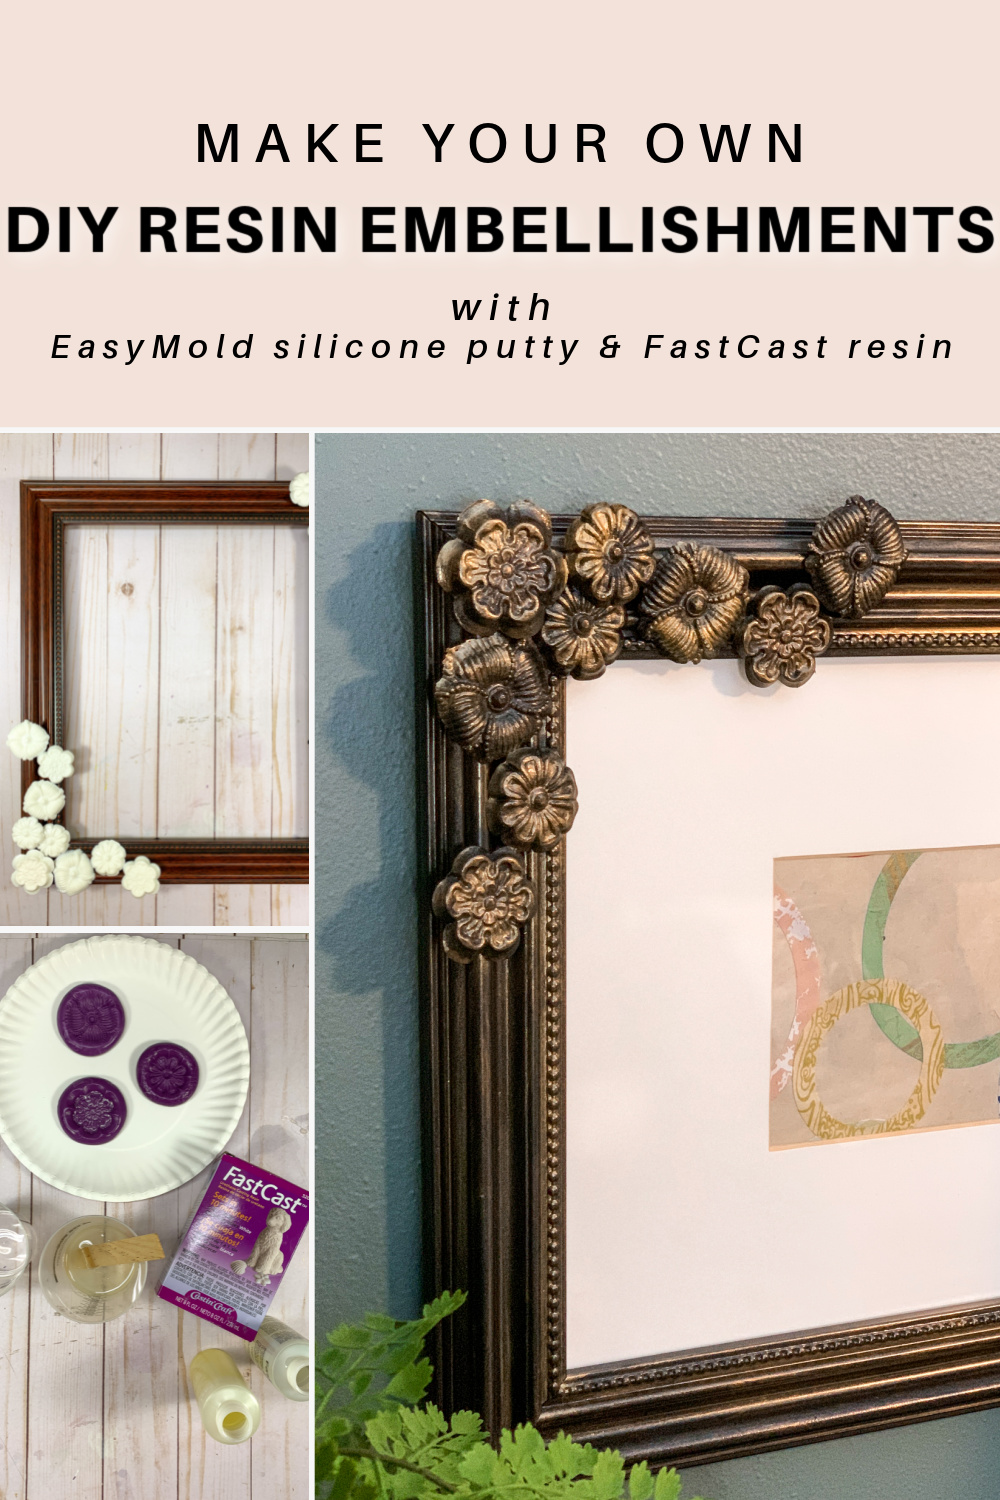 Learn how to make your own resin embellishments to adorn anything! It's so easy to make a mold of any object and cast it in resin, to create embellishments for furniture, home decor, and more. via @resincraftsblog